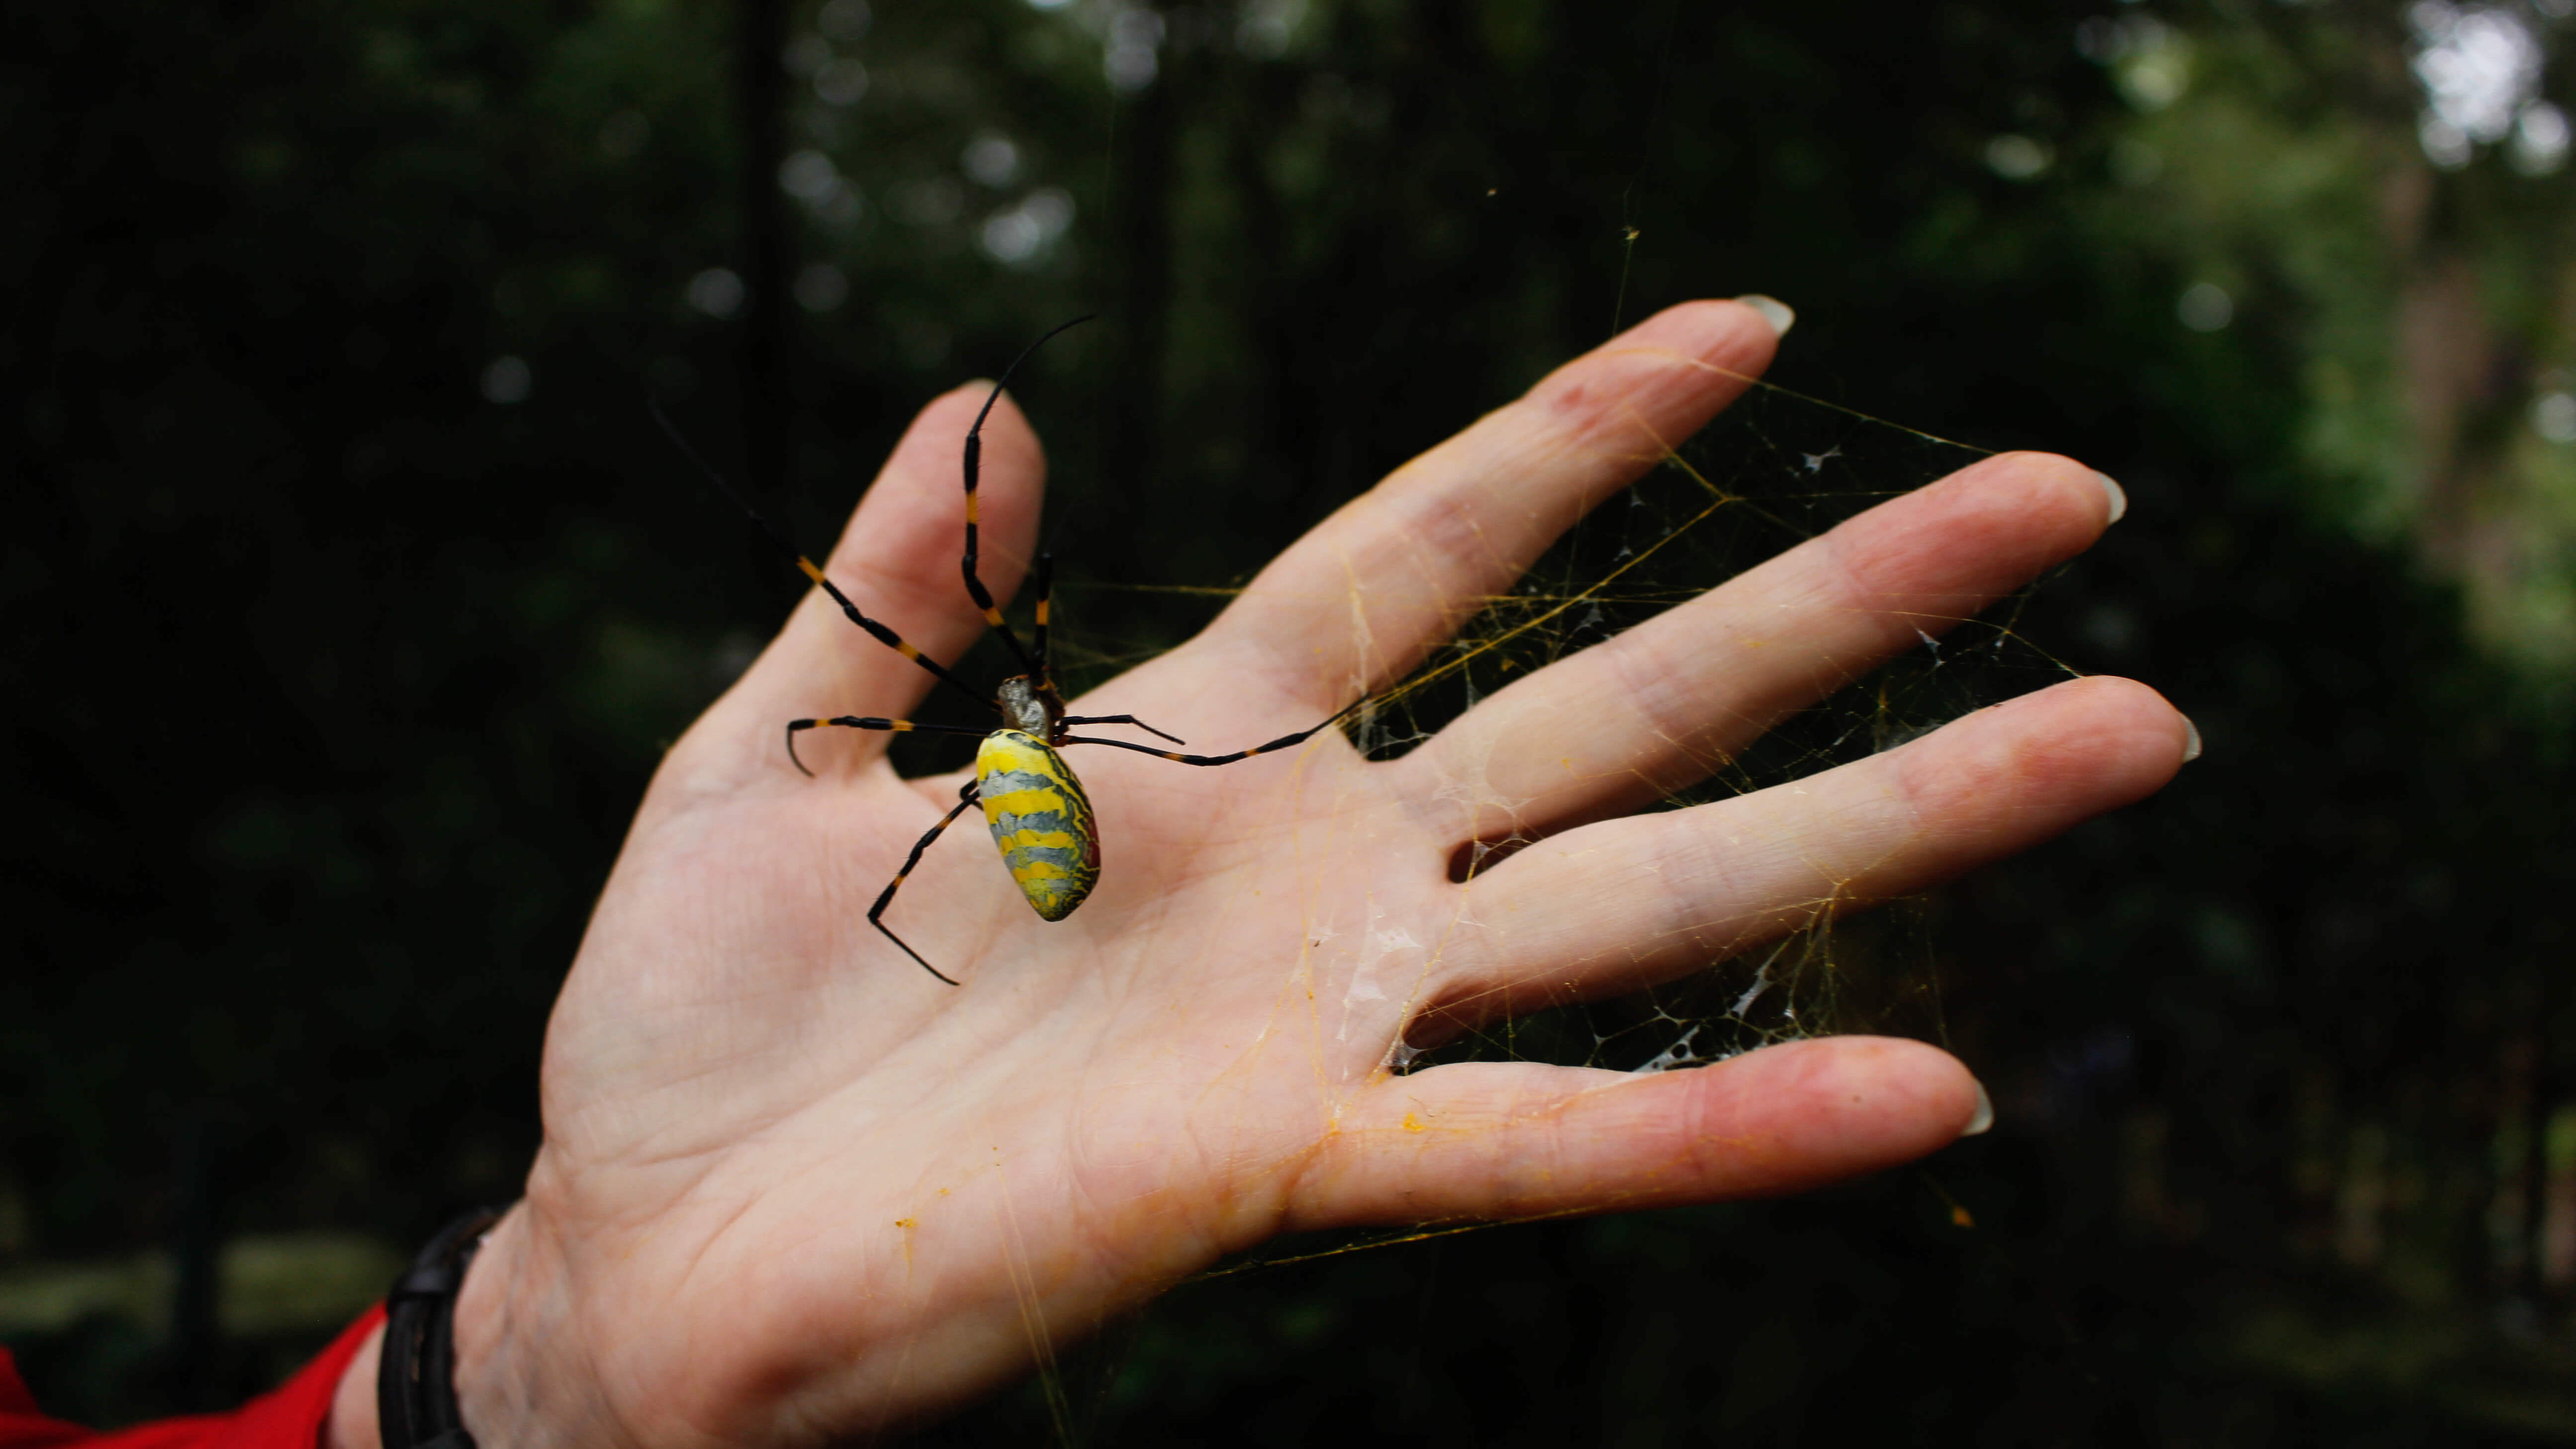 What you need to know about giant, invasive joro spiders